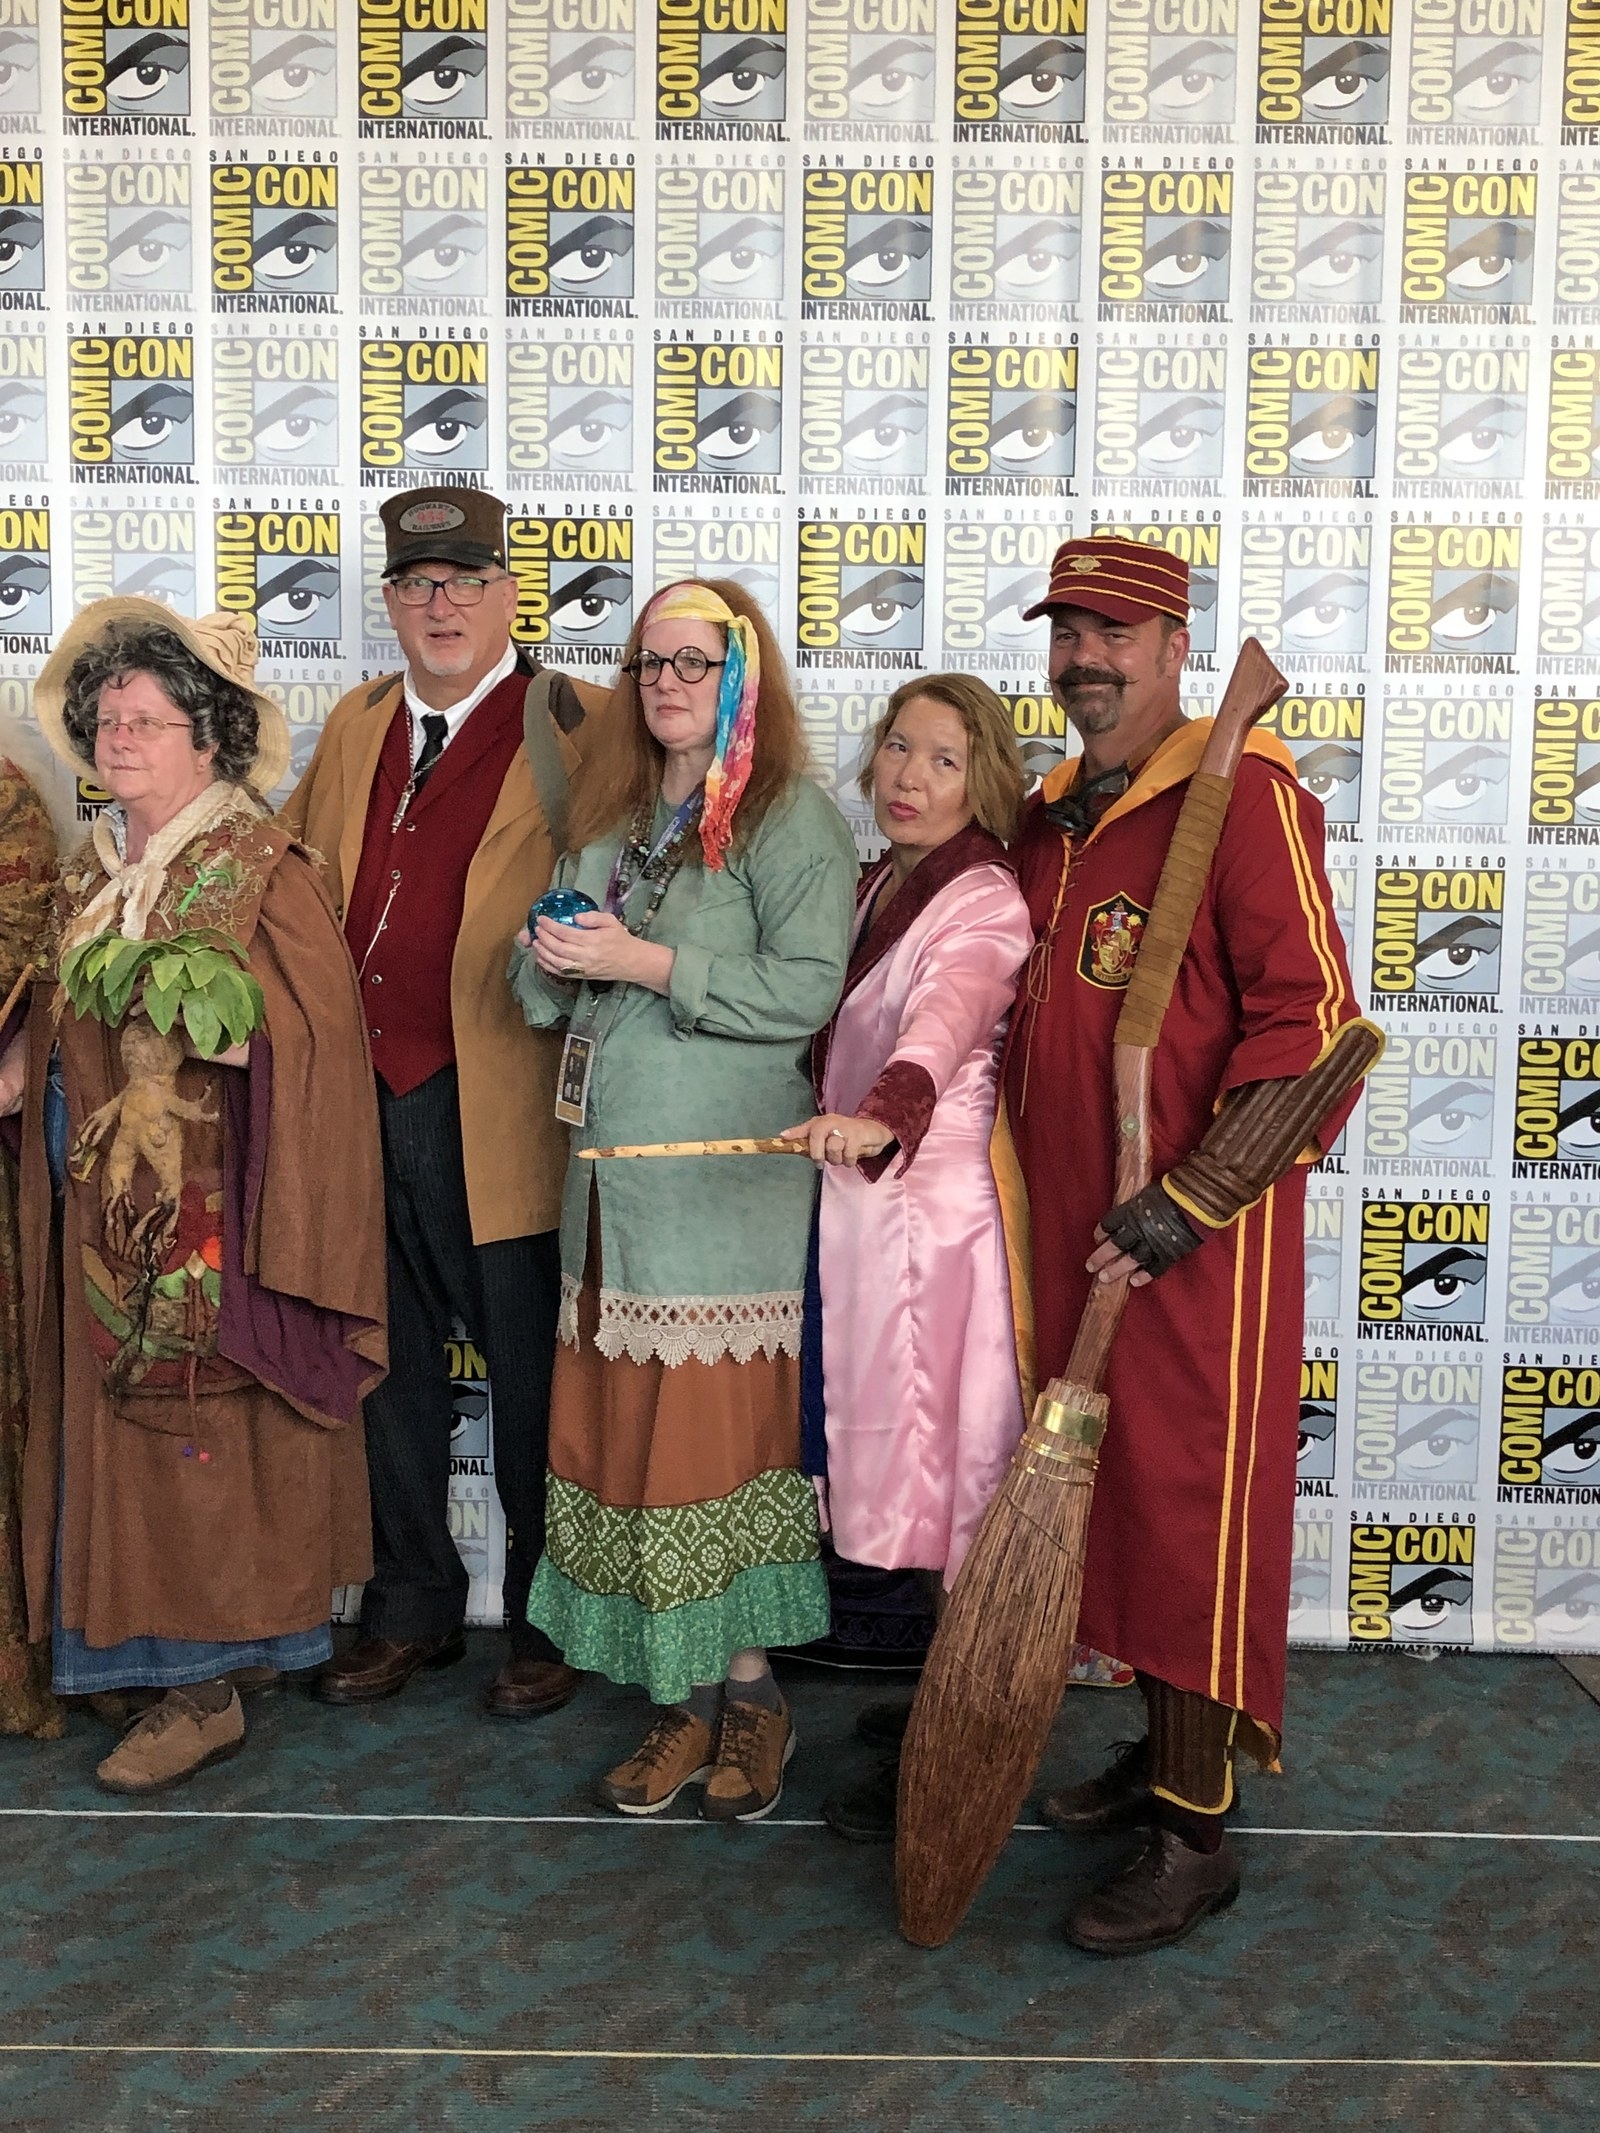 24 Amazing Cosplay Costumes From San Diego Comic Con